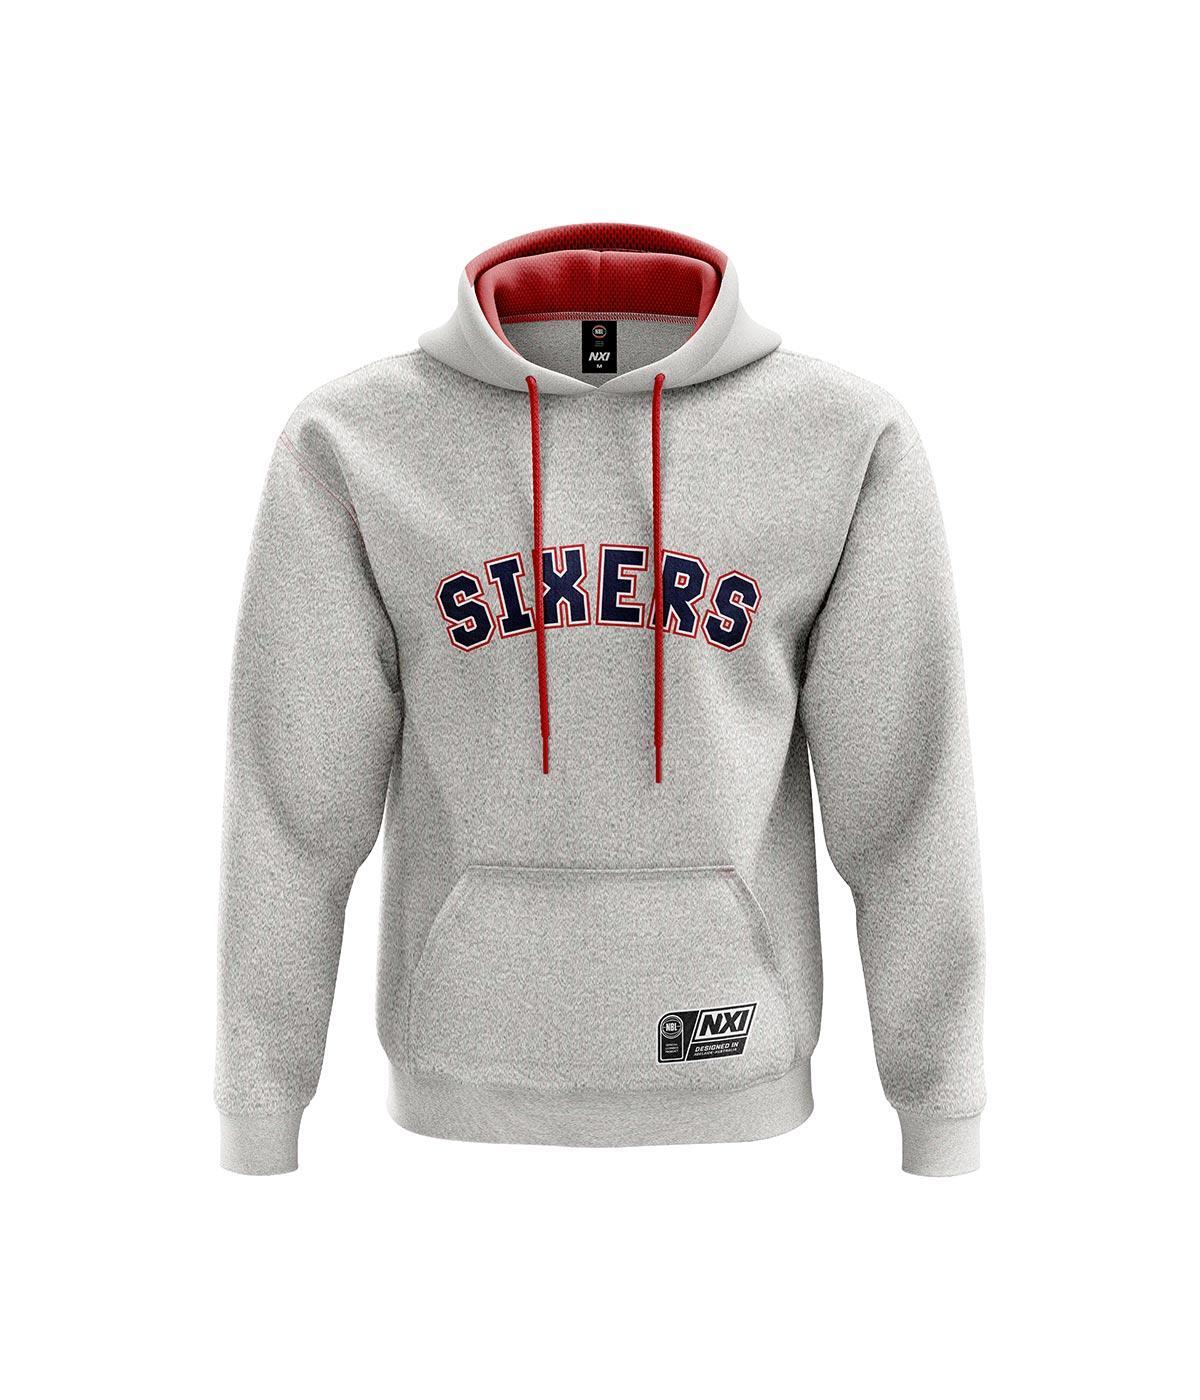 Sixers Grey Youth Hoodie - Adelaide 36ers